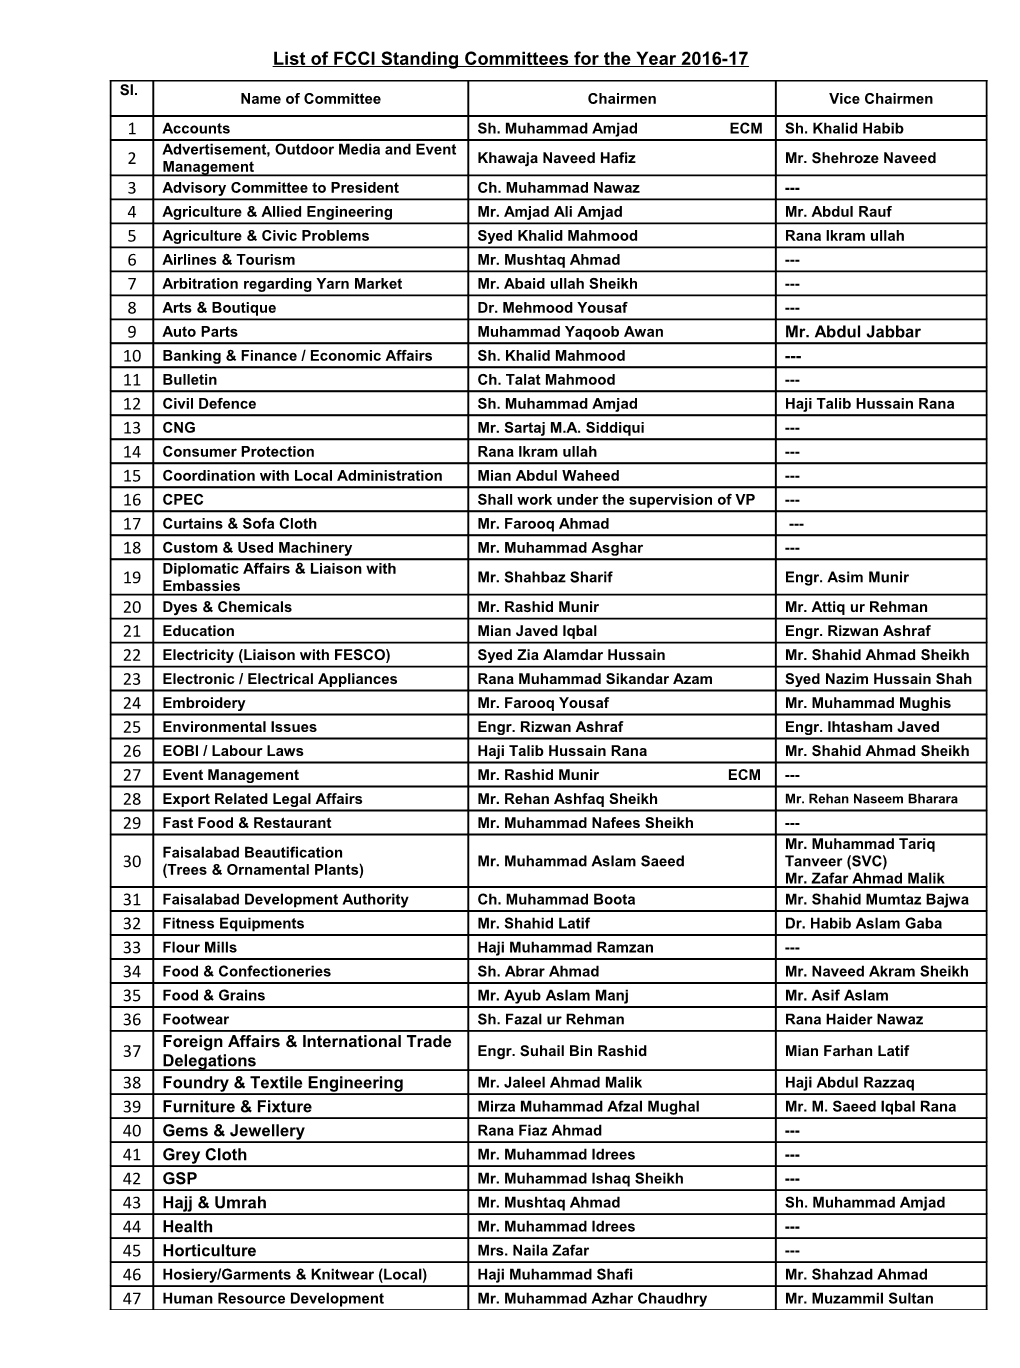 Detailed List of FCCI Standing Committees for the Year 2006-07